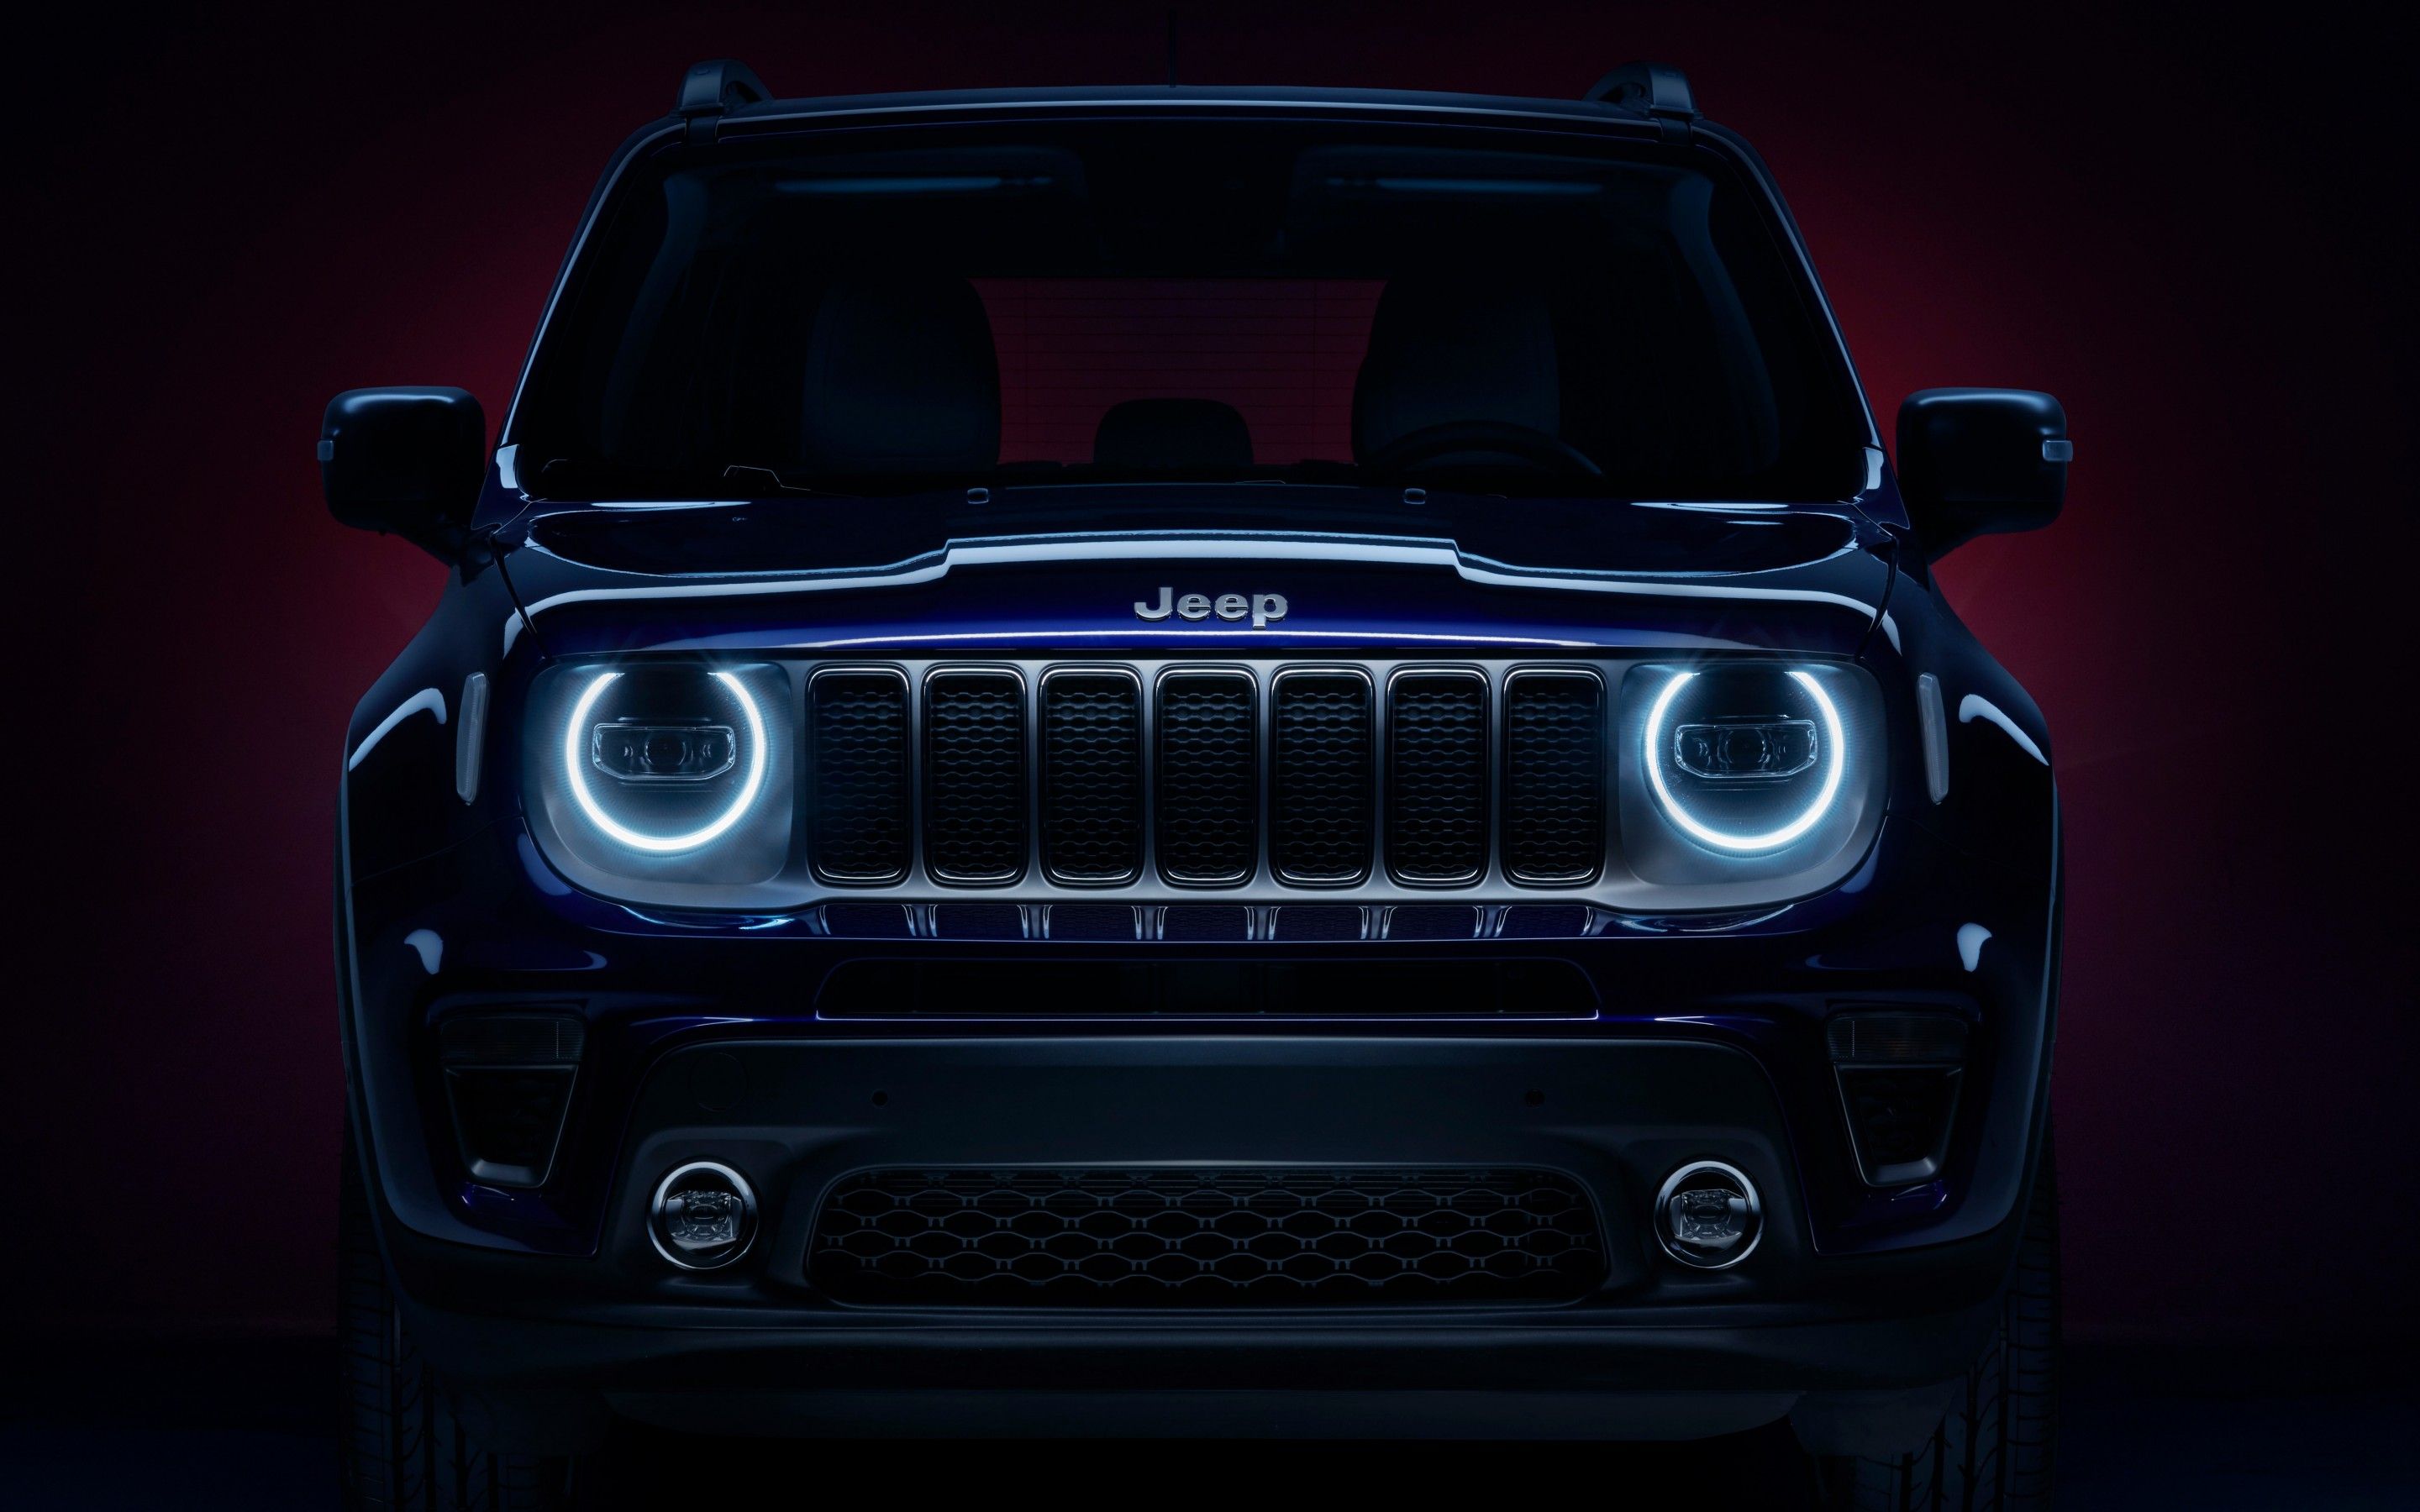 2880x1800 Wallpaper Jeep Renegade Limited 2022 4k 5k Black Dark Wallpaper For Iphone Android Mobile And Desktop